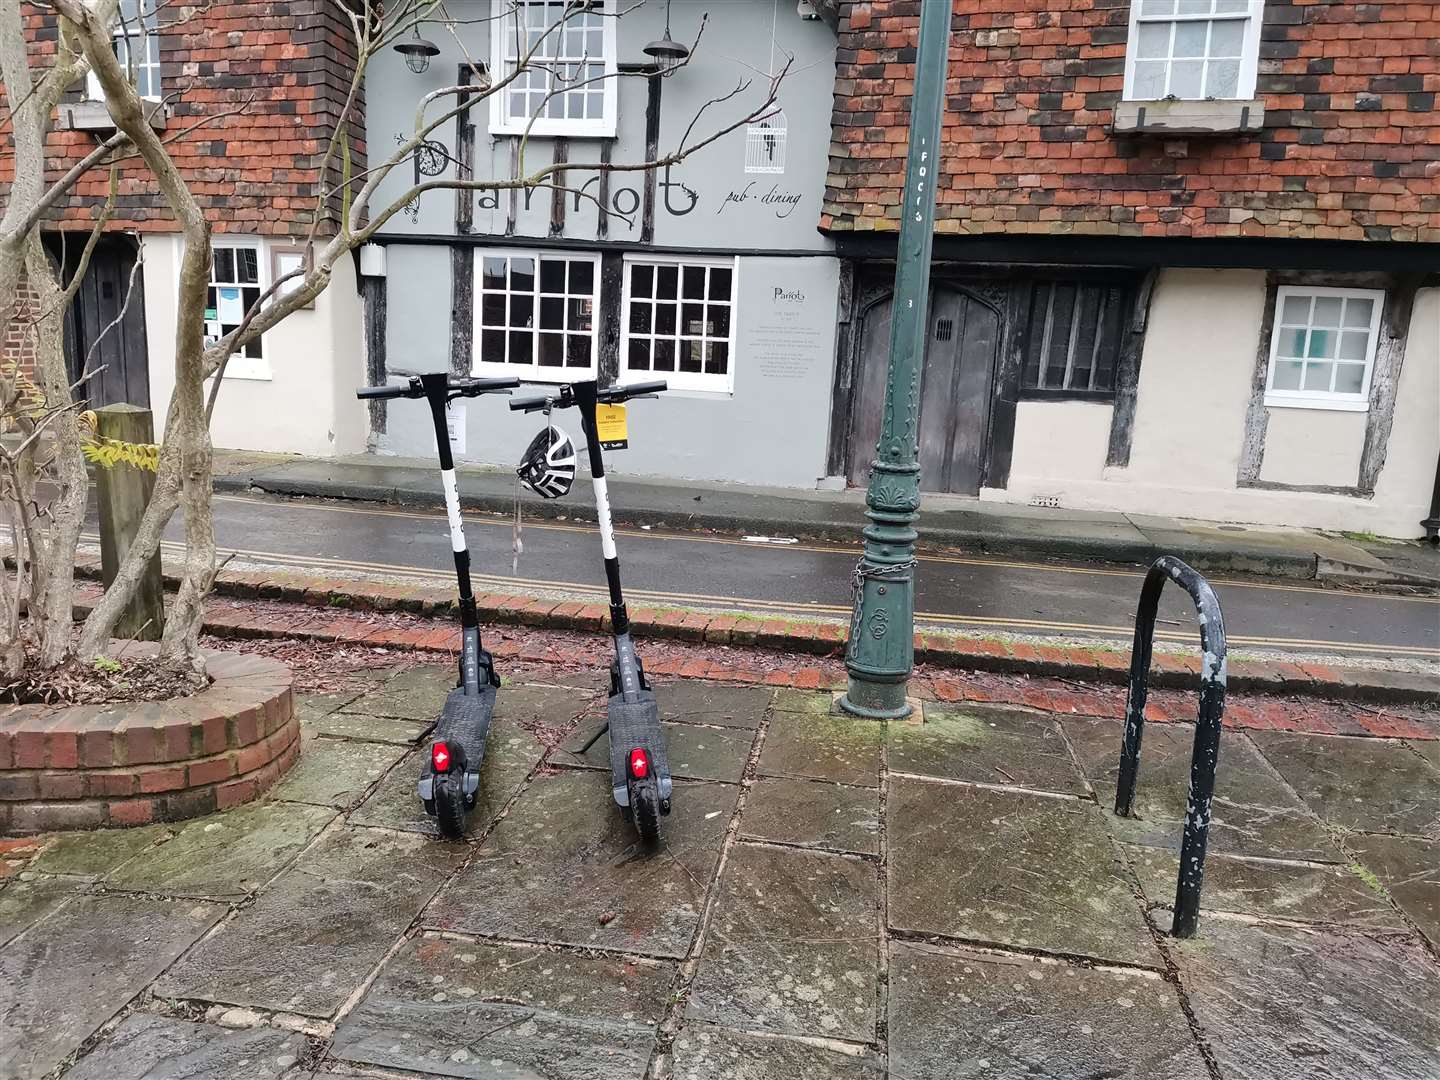 The electric scooter trial area is being widened